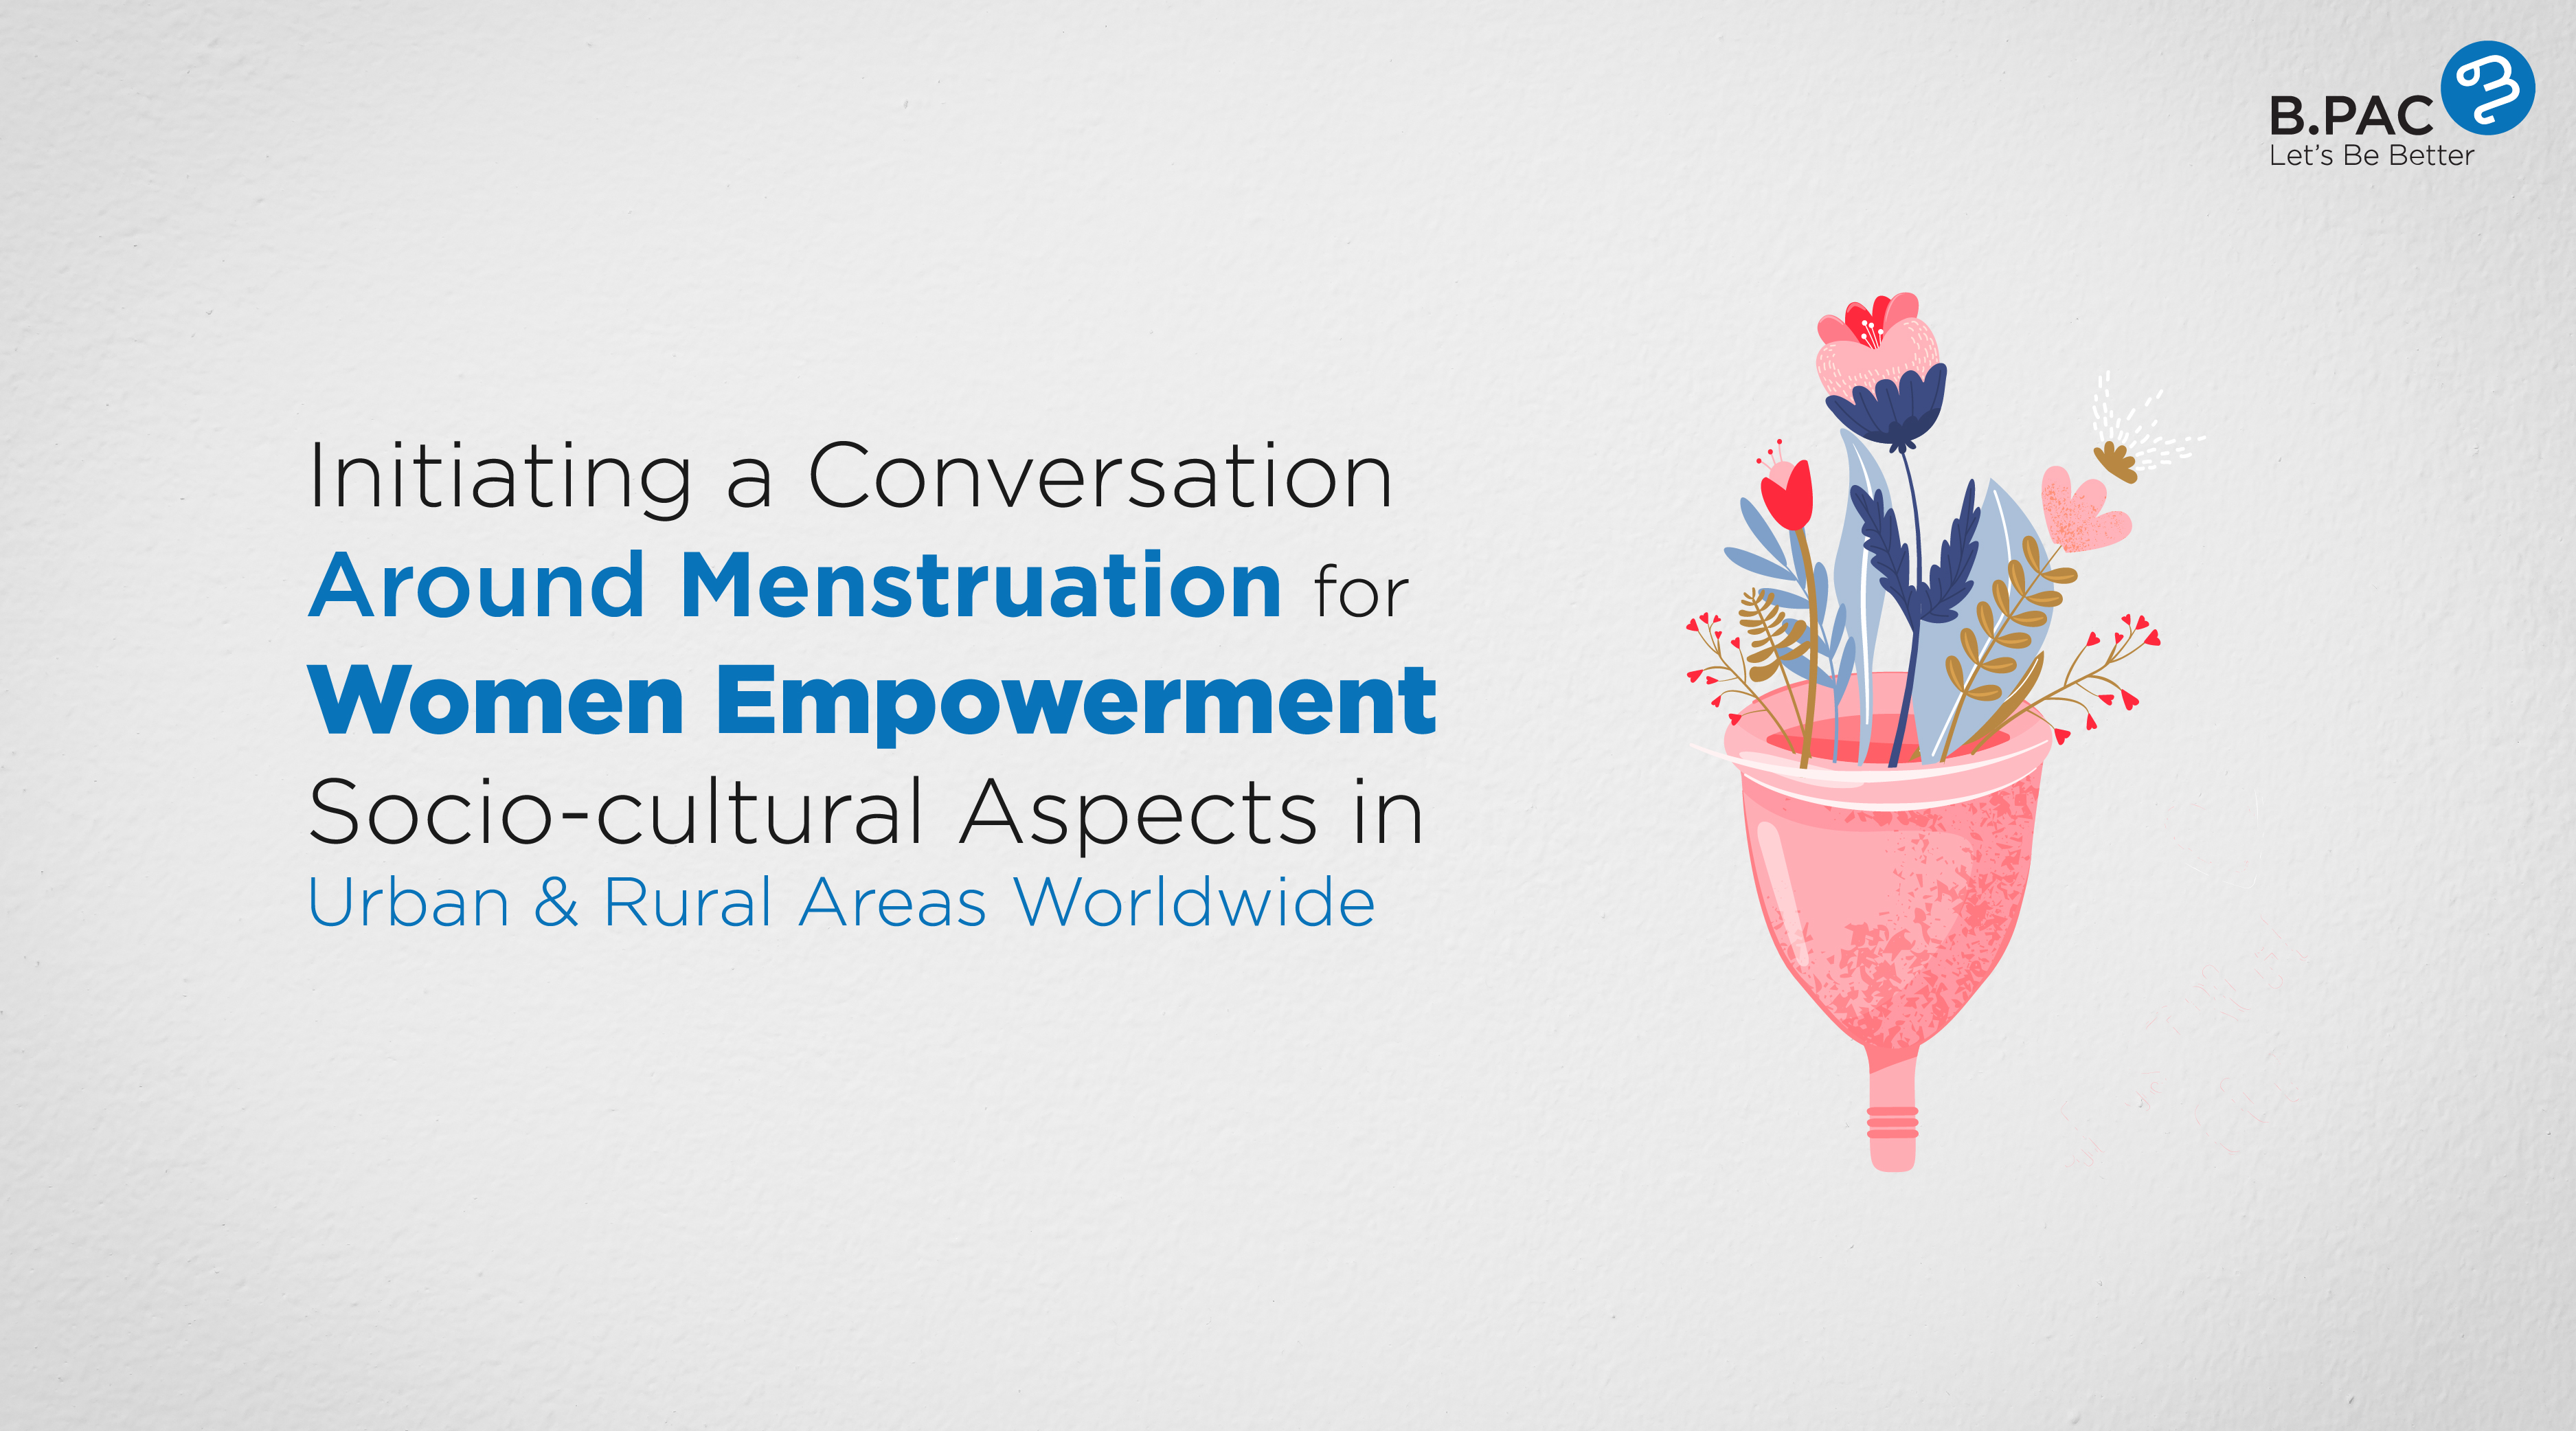 Initiating a Conversation Around Menstruation for Women Empowerment: Socio-cultural Aspects in Urban & Rural Areas Worldwide